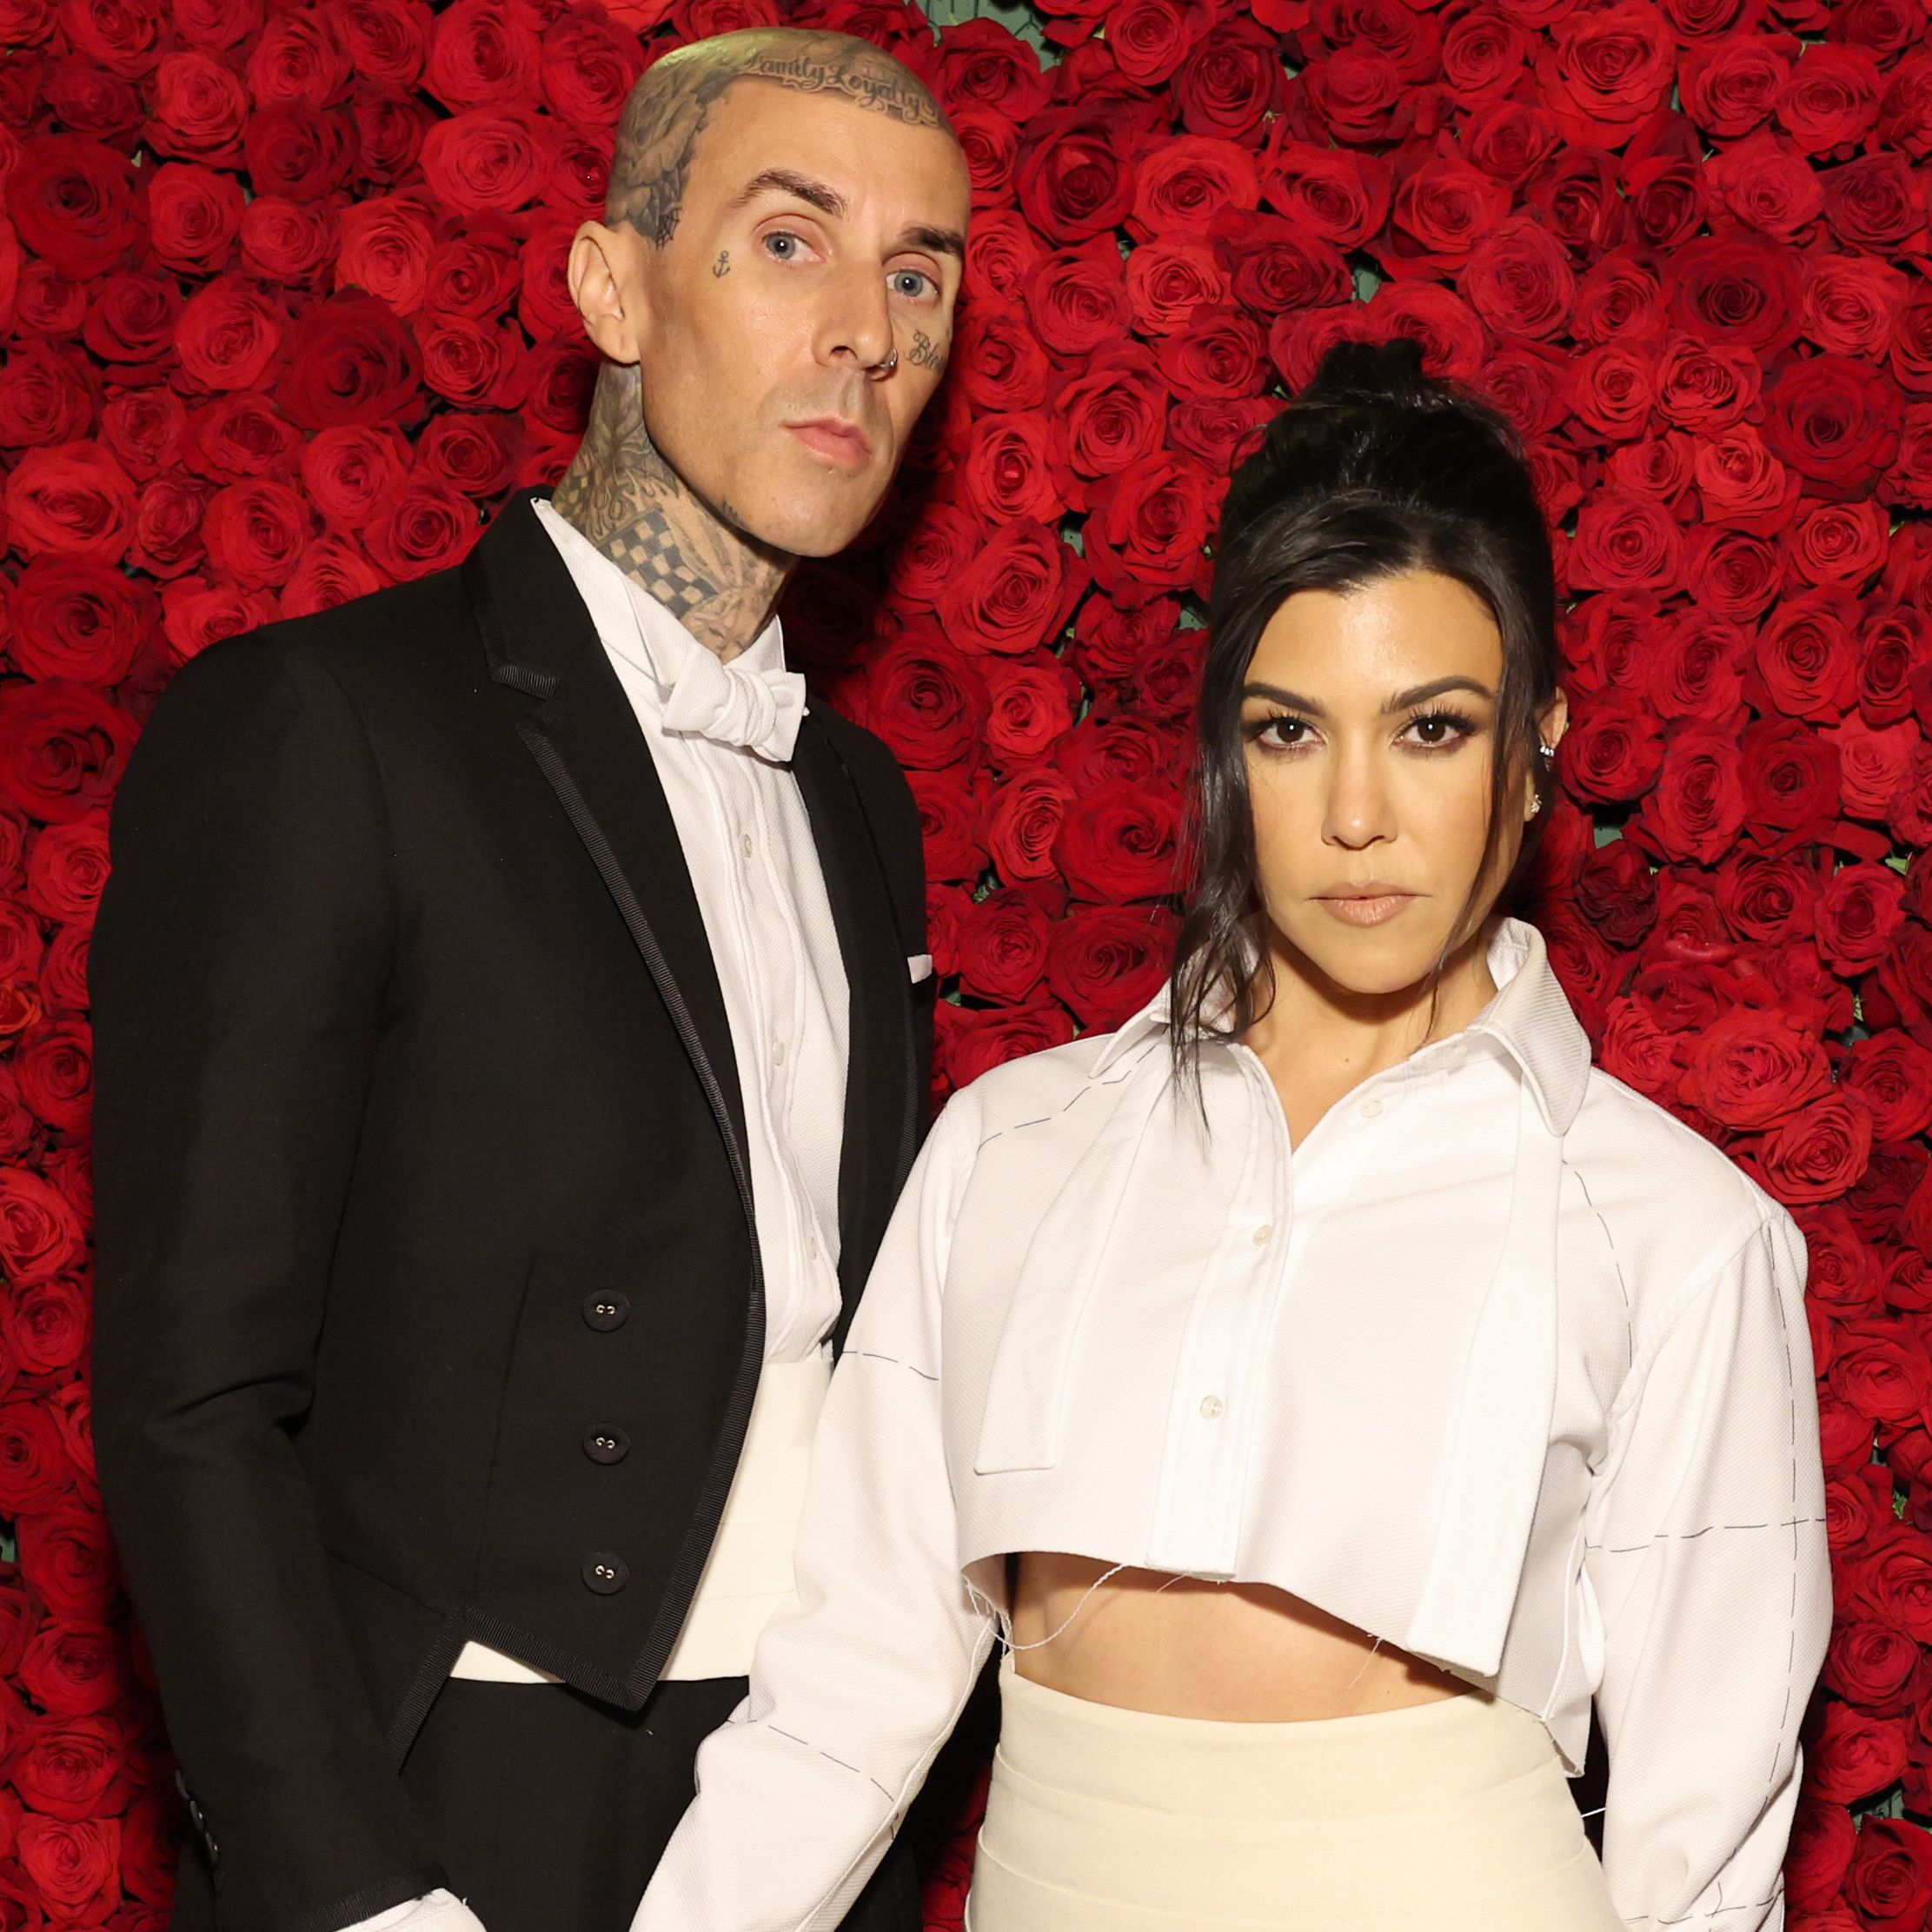 Alert: Travis Barker Just Revealed the Name of His Baby With Kourtney Kardashian